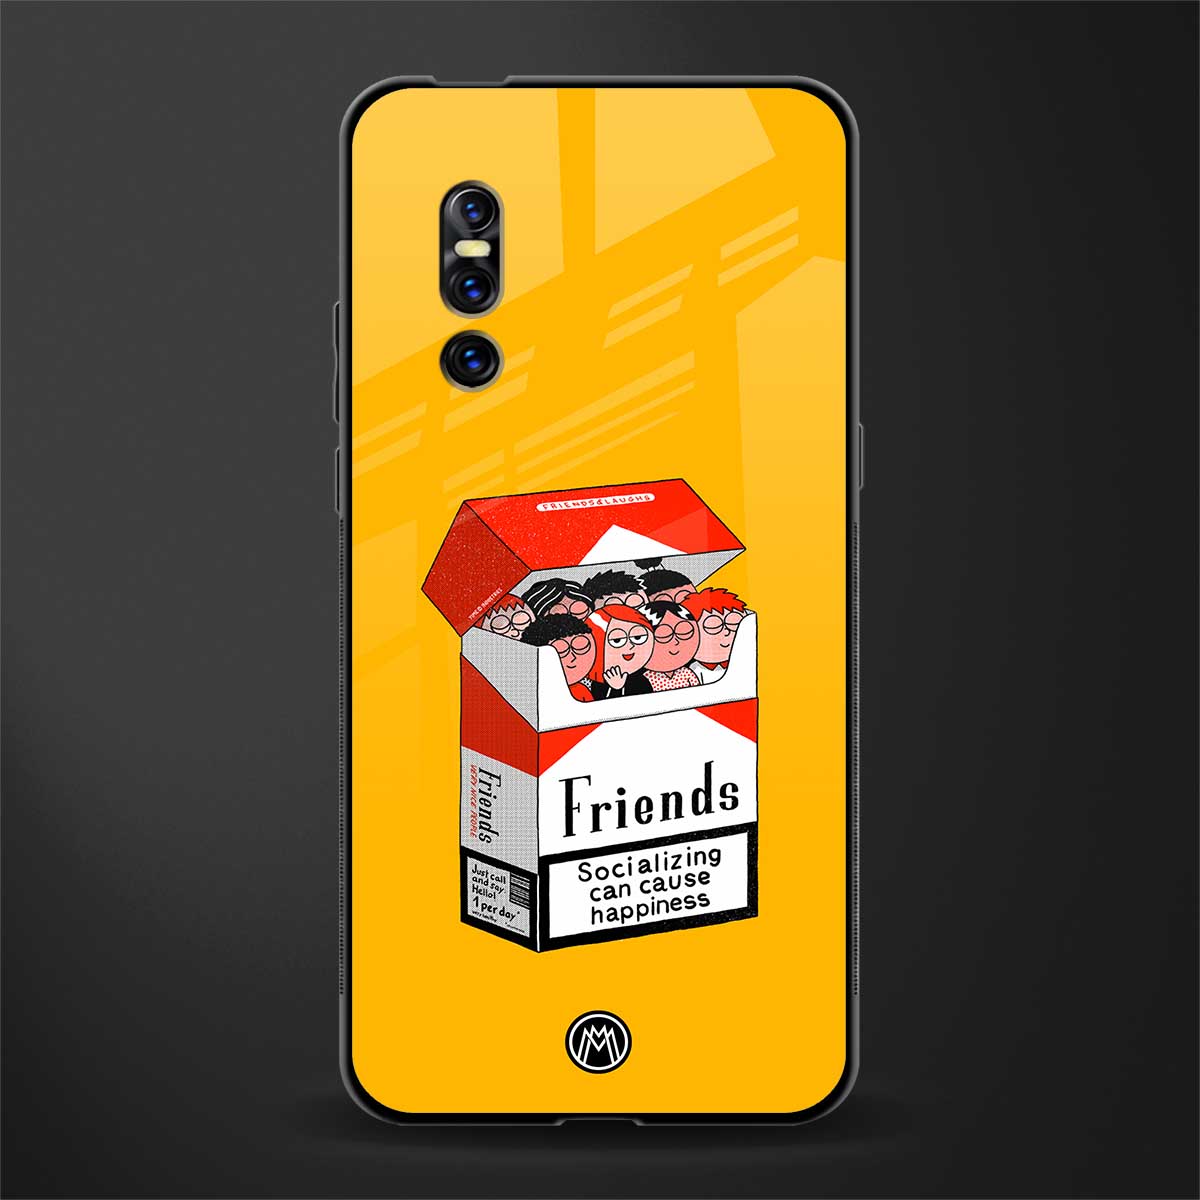 socializing can cause happiness glass case for vivo v15 pro image